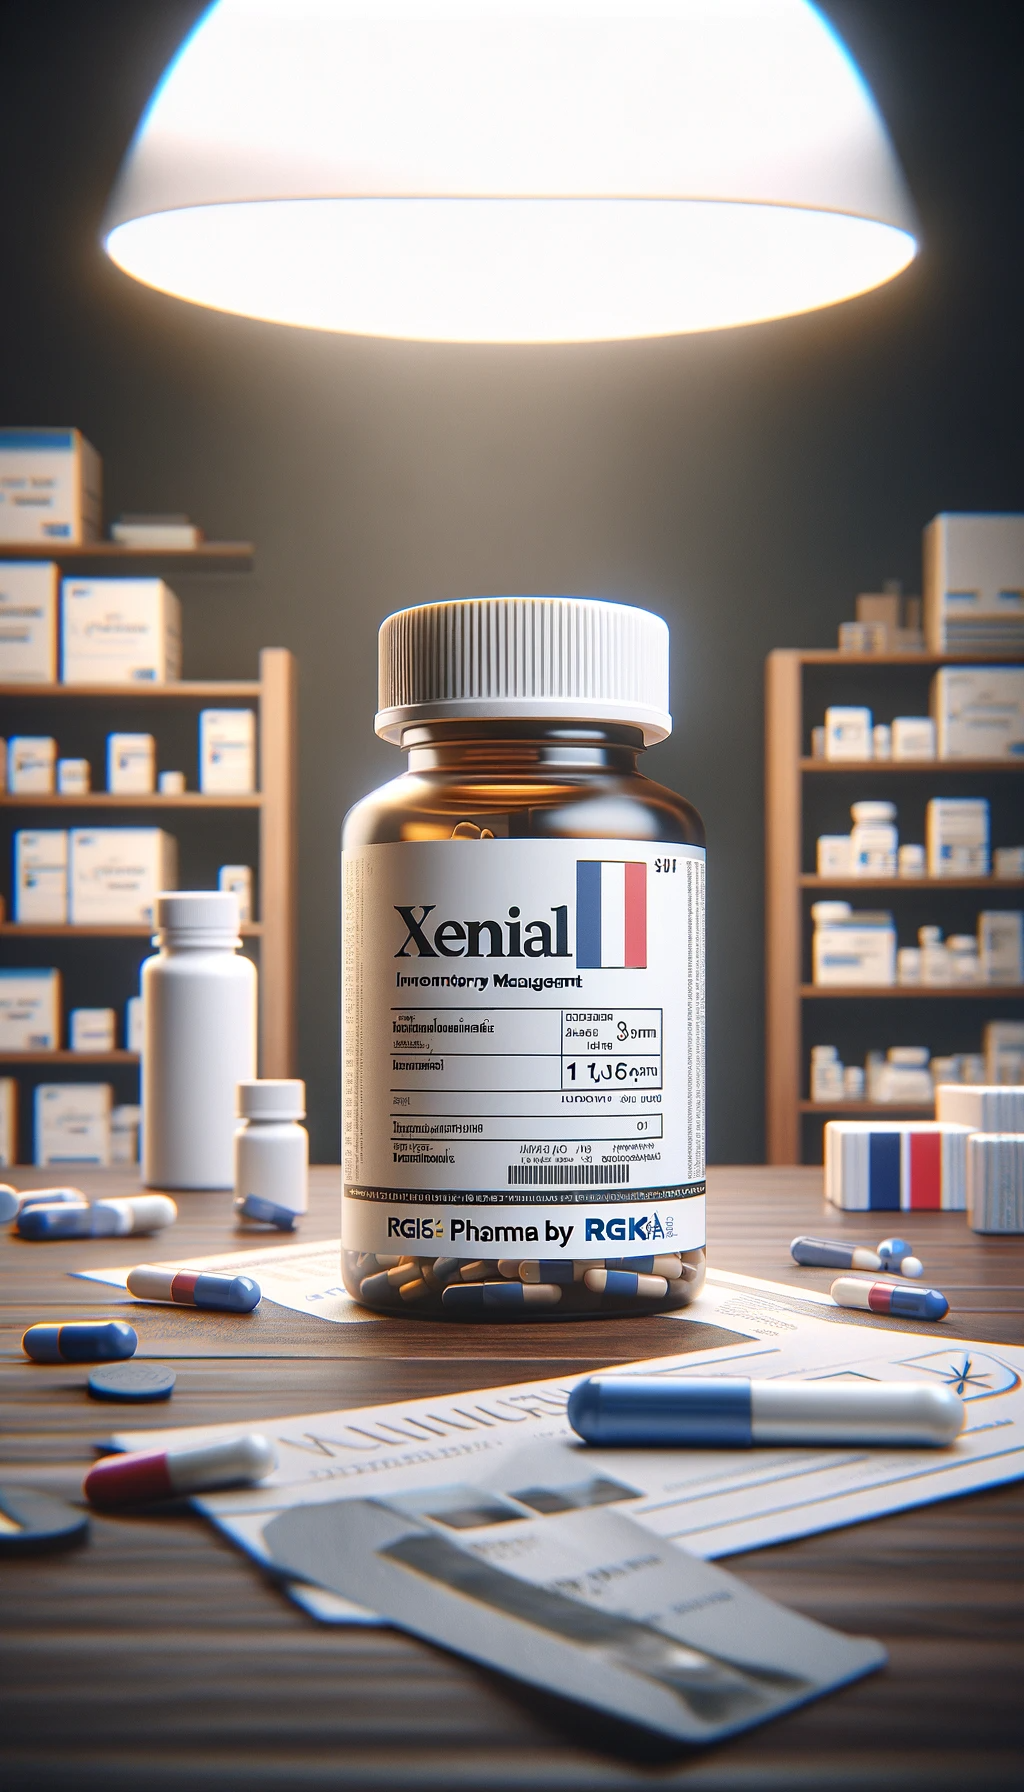 Vente xenical france